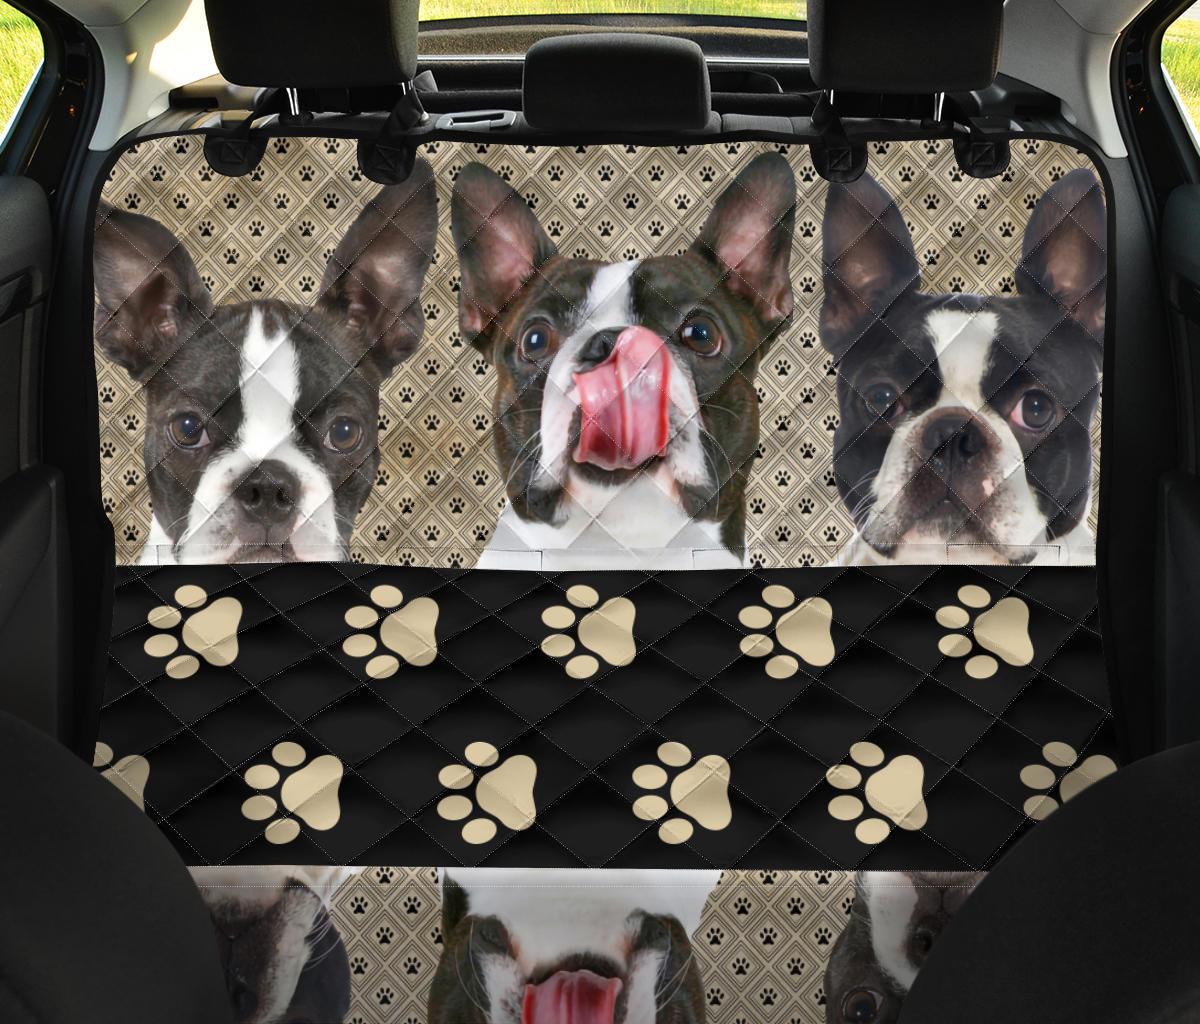 Boston Terrier Pet Dog Seat Covers For Car-Gear Wanta